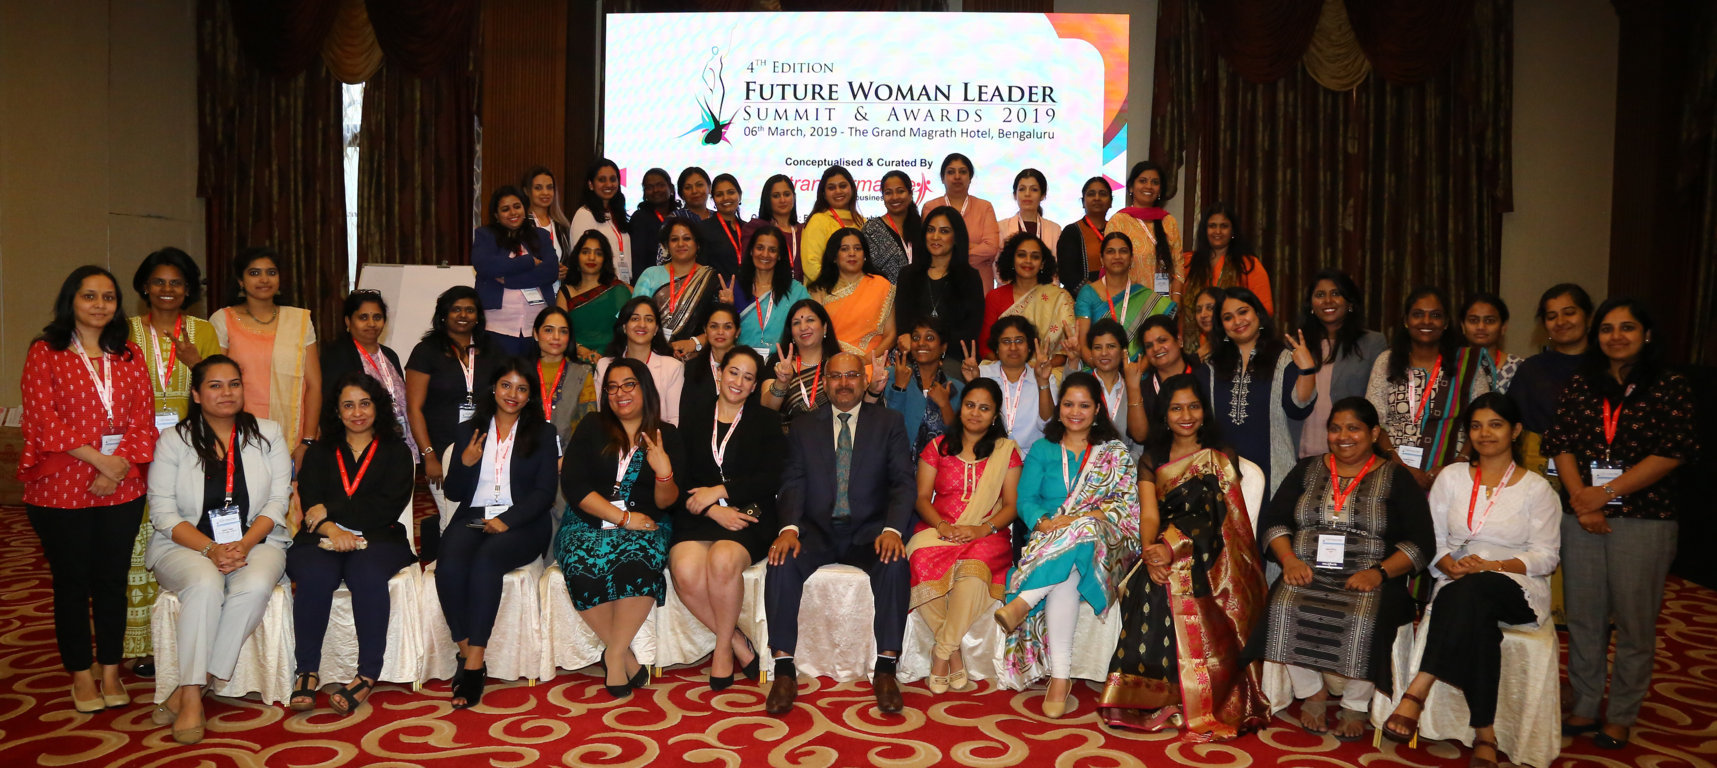 4th Edition Future Woman Leaders Summit & Awards 2019